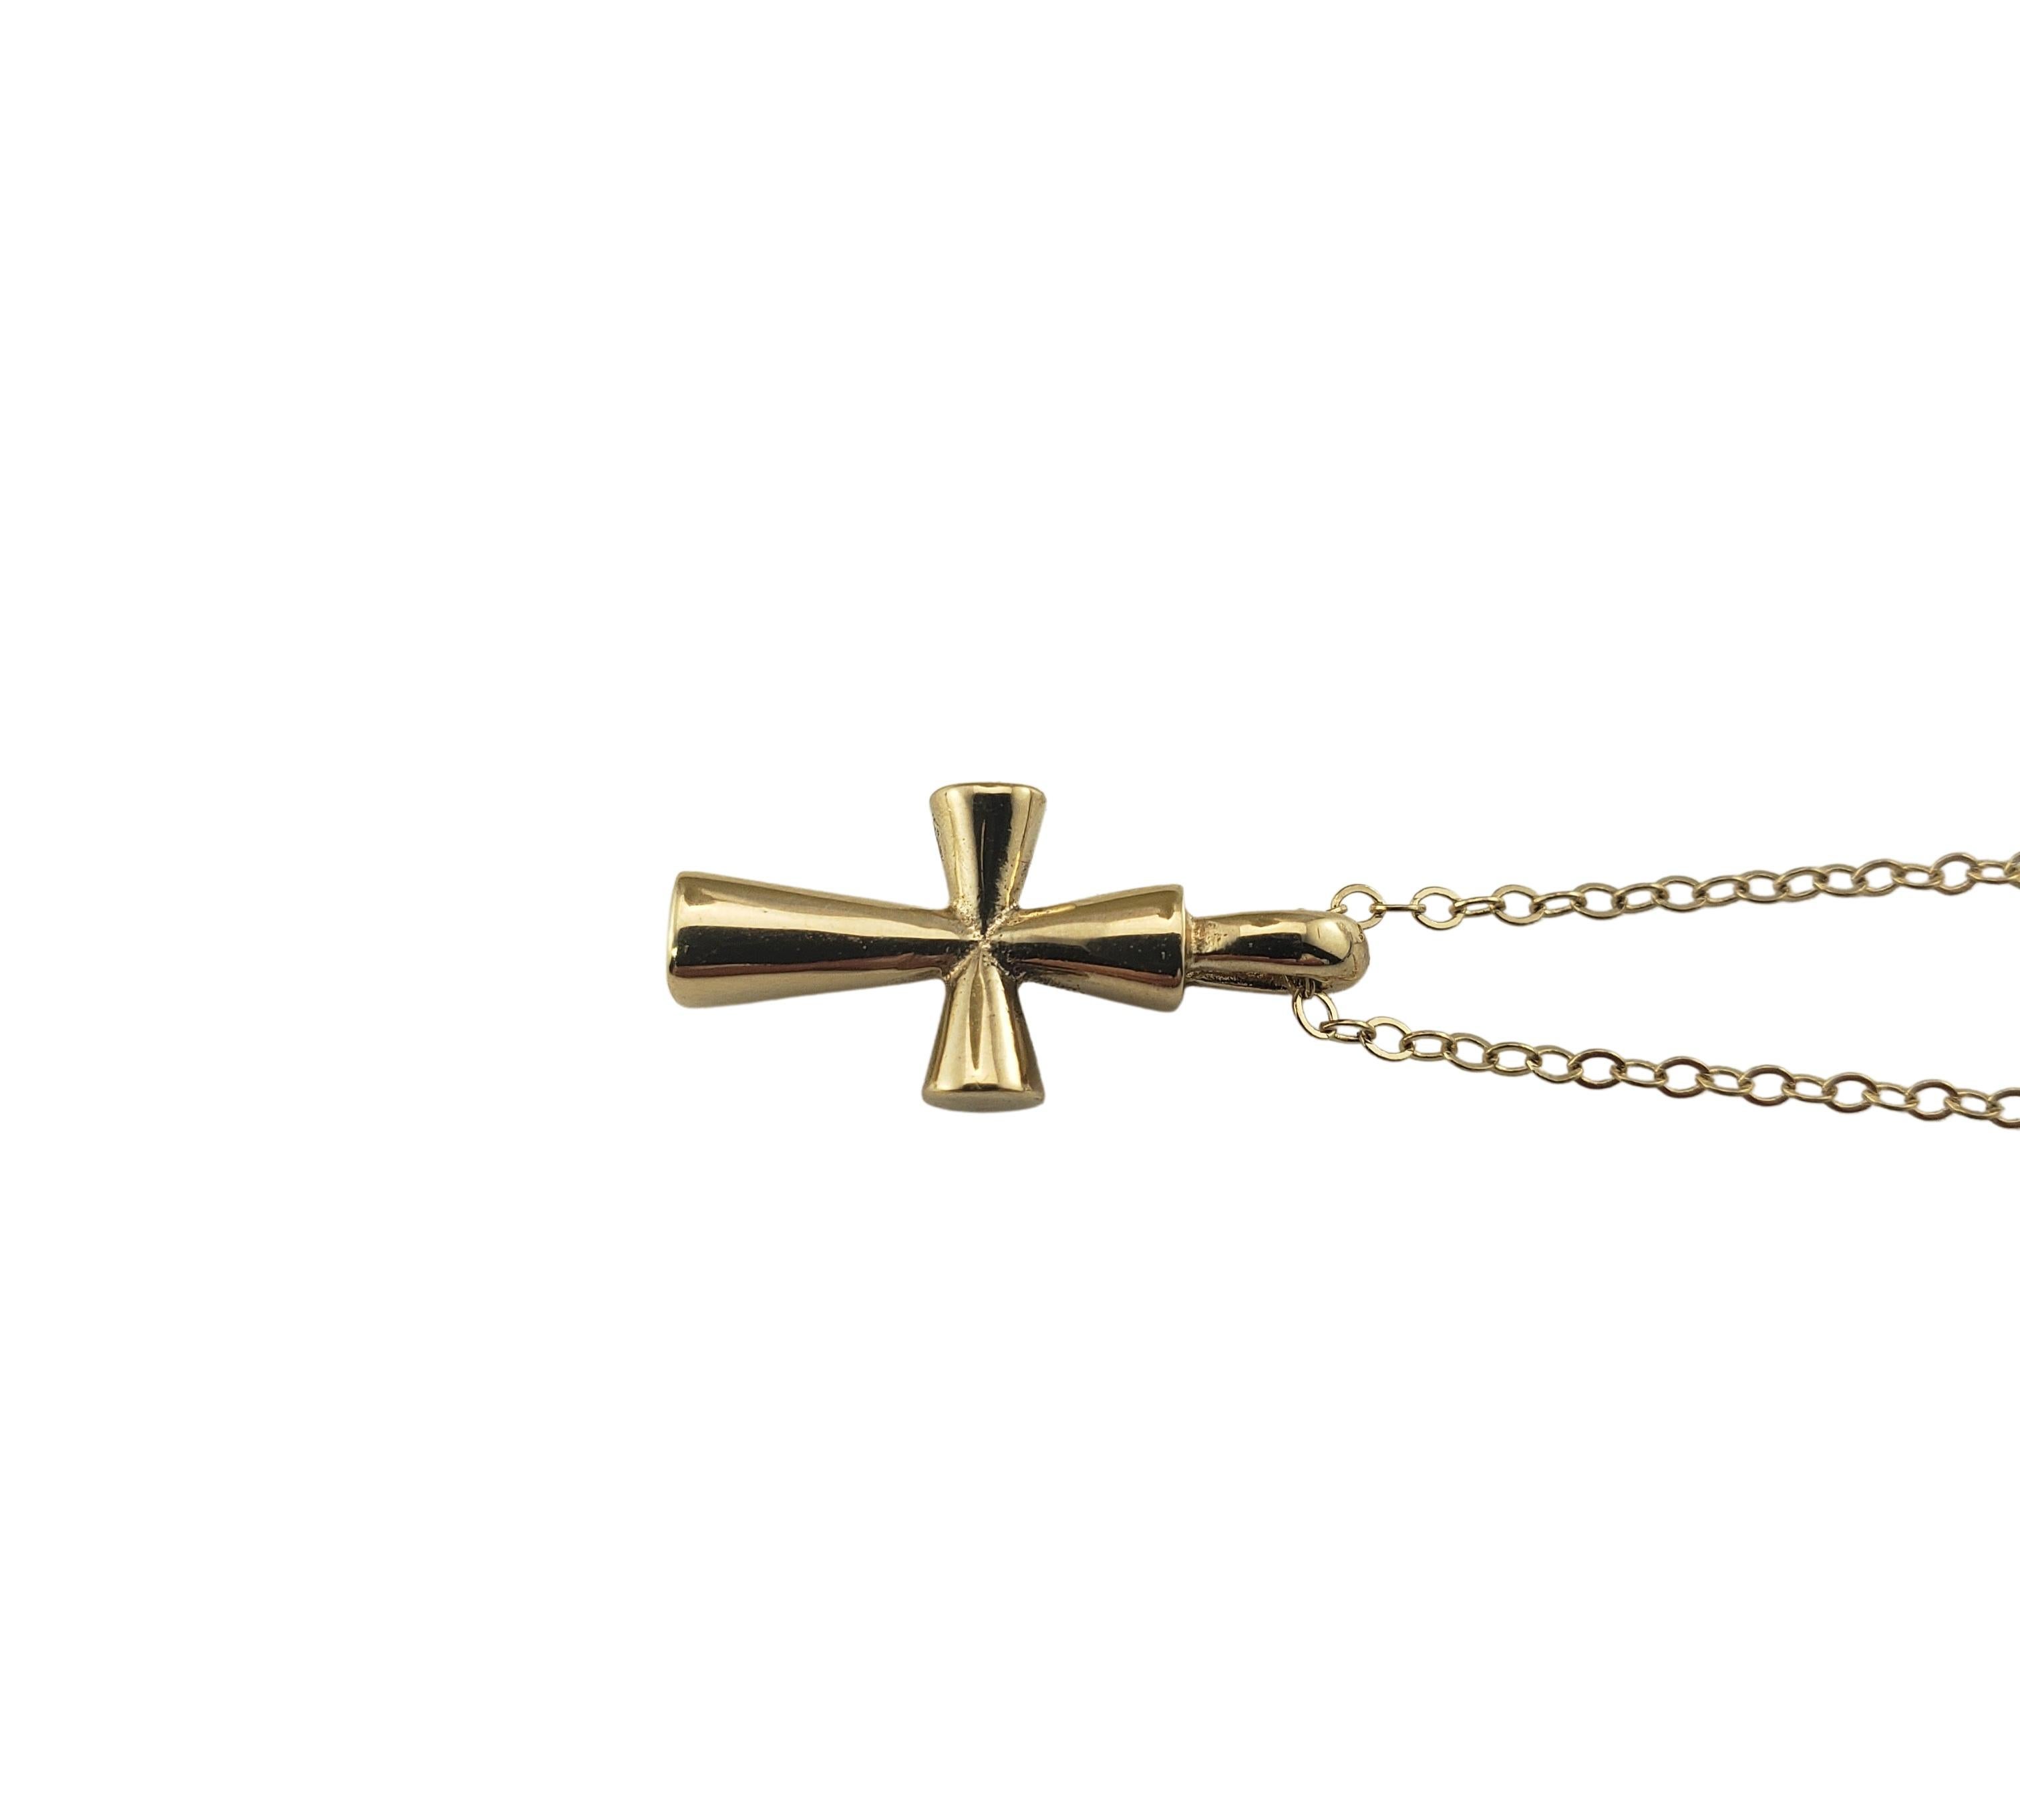 Vintage James Avery 14 Karat Yellow Gold Cross Pendant Necklace-

This lovely cross pendant is crafted in 14K yellow gold and suspends from a classic cable necklace. Chain is NOT James Avery.

Size: 15 inches (necklace)
18 mm x 8 mm (cross)

Weight: